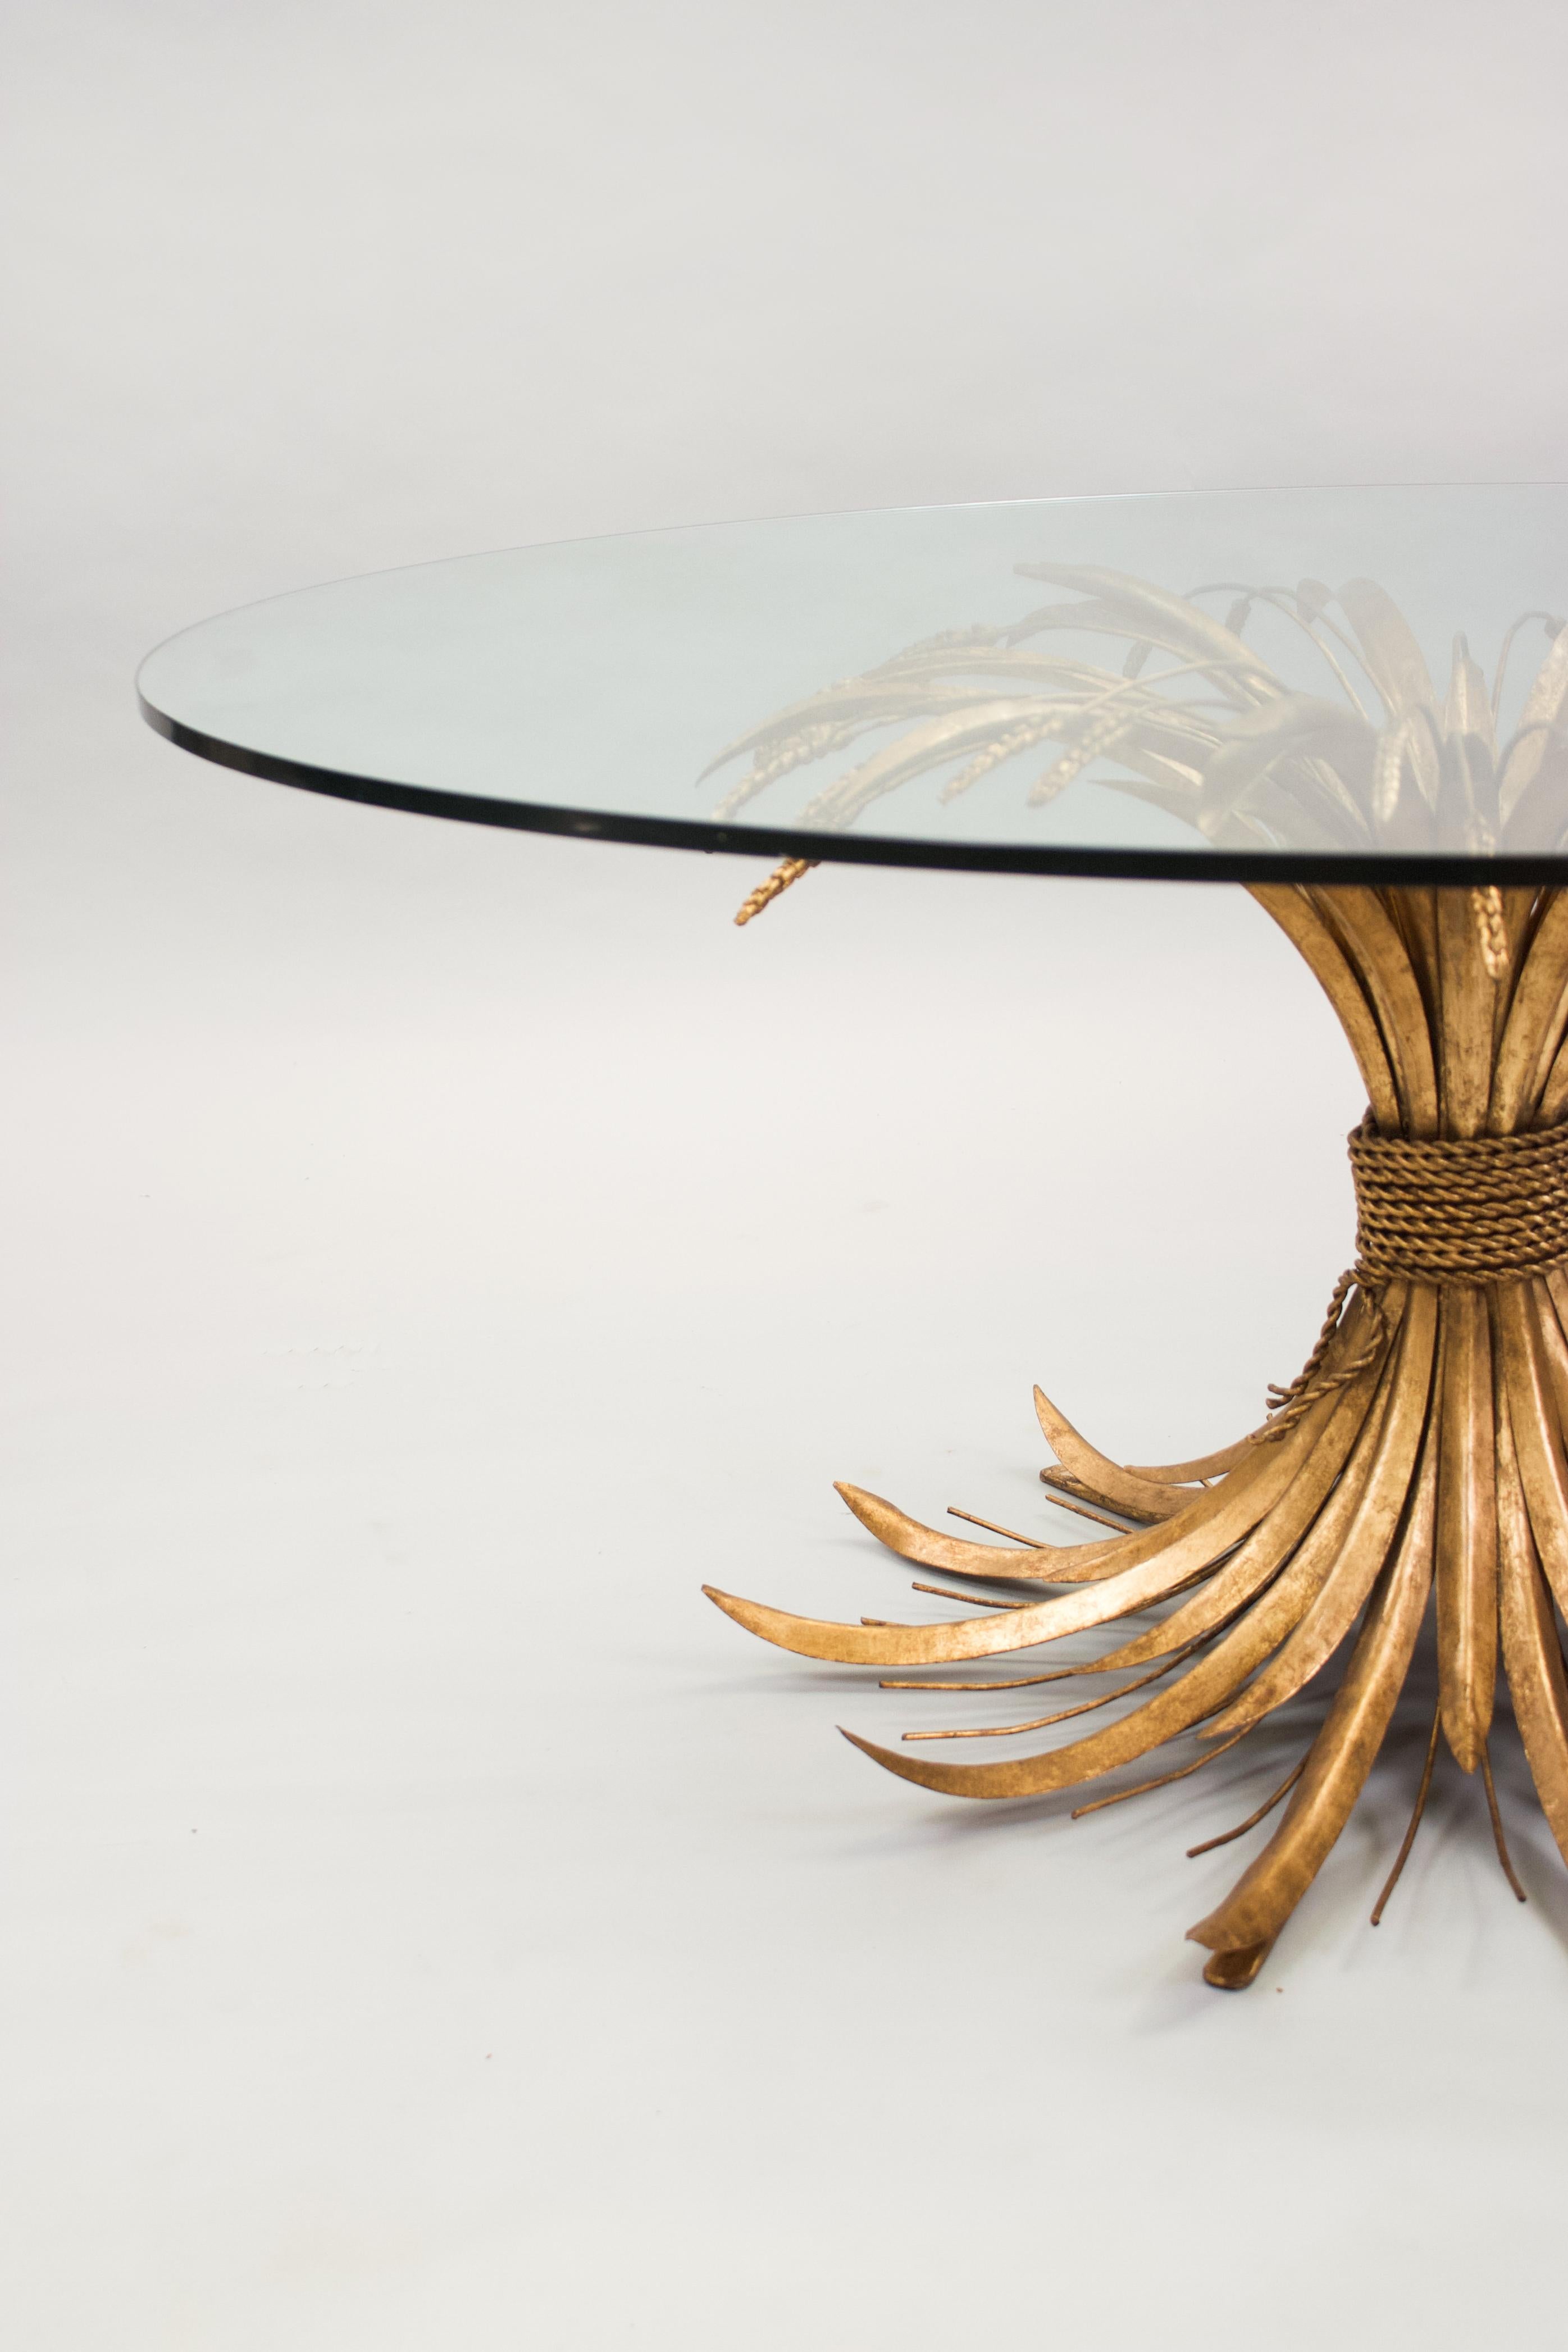 An exceptionally larger round low table in gilt metal representing a wheat sheaf, glass top. Circa 1960. Similar table at Coco Chanel’s appartement. 

Dimensions
 H 57cm (22”) / L 130cm (51”) 